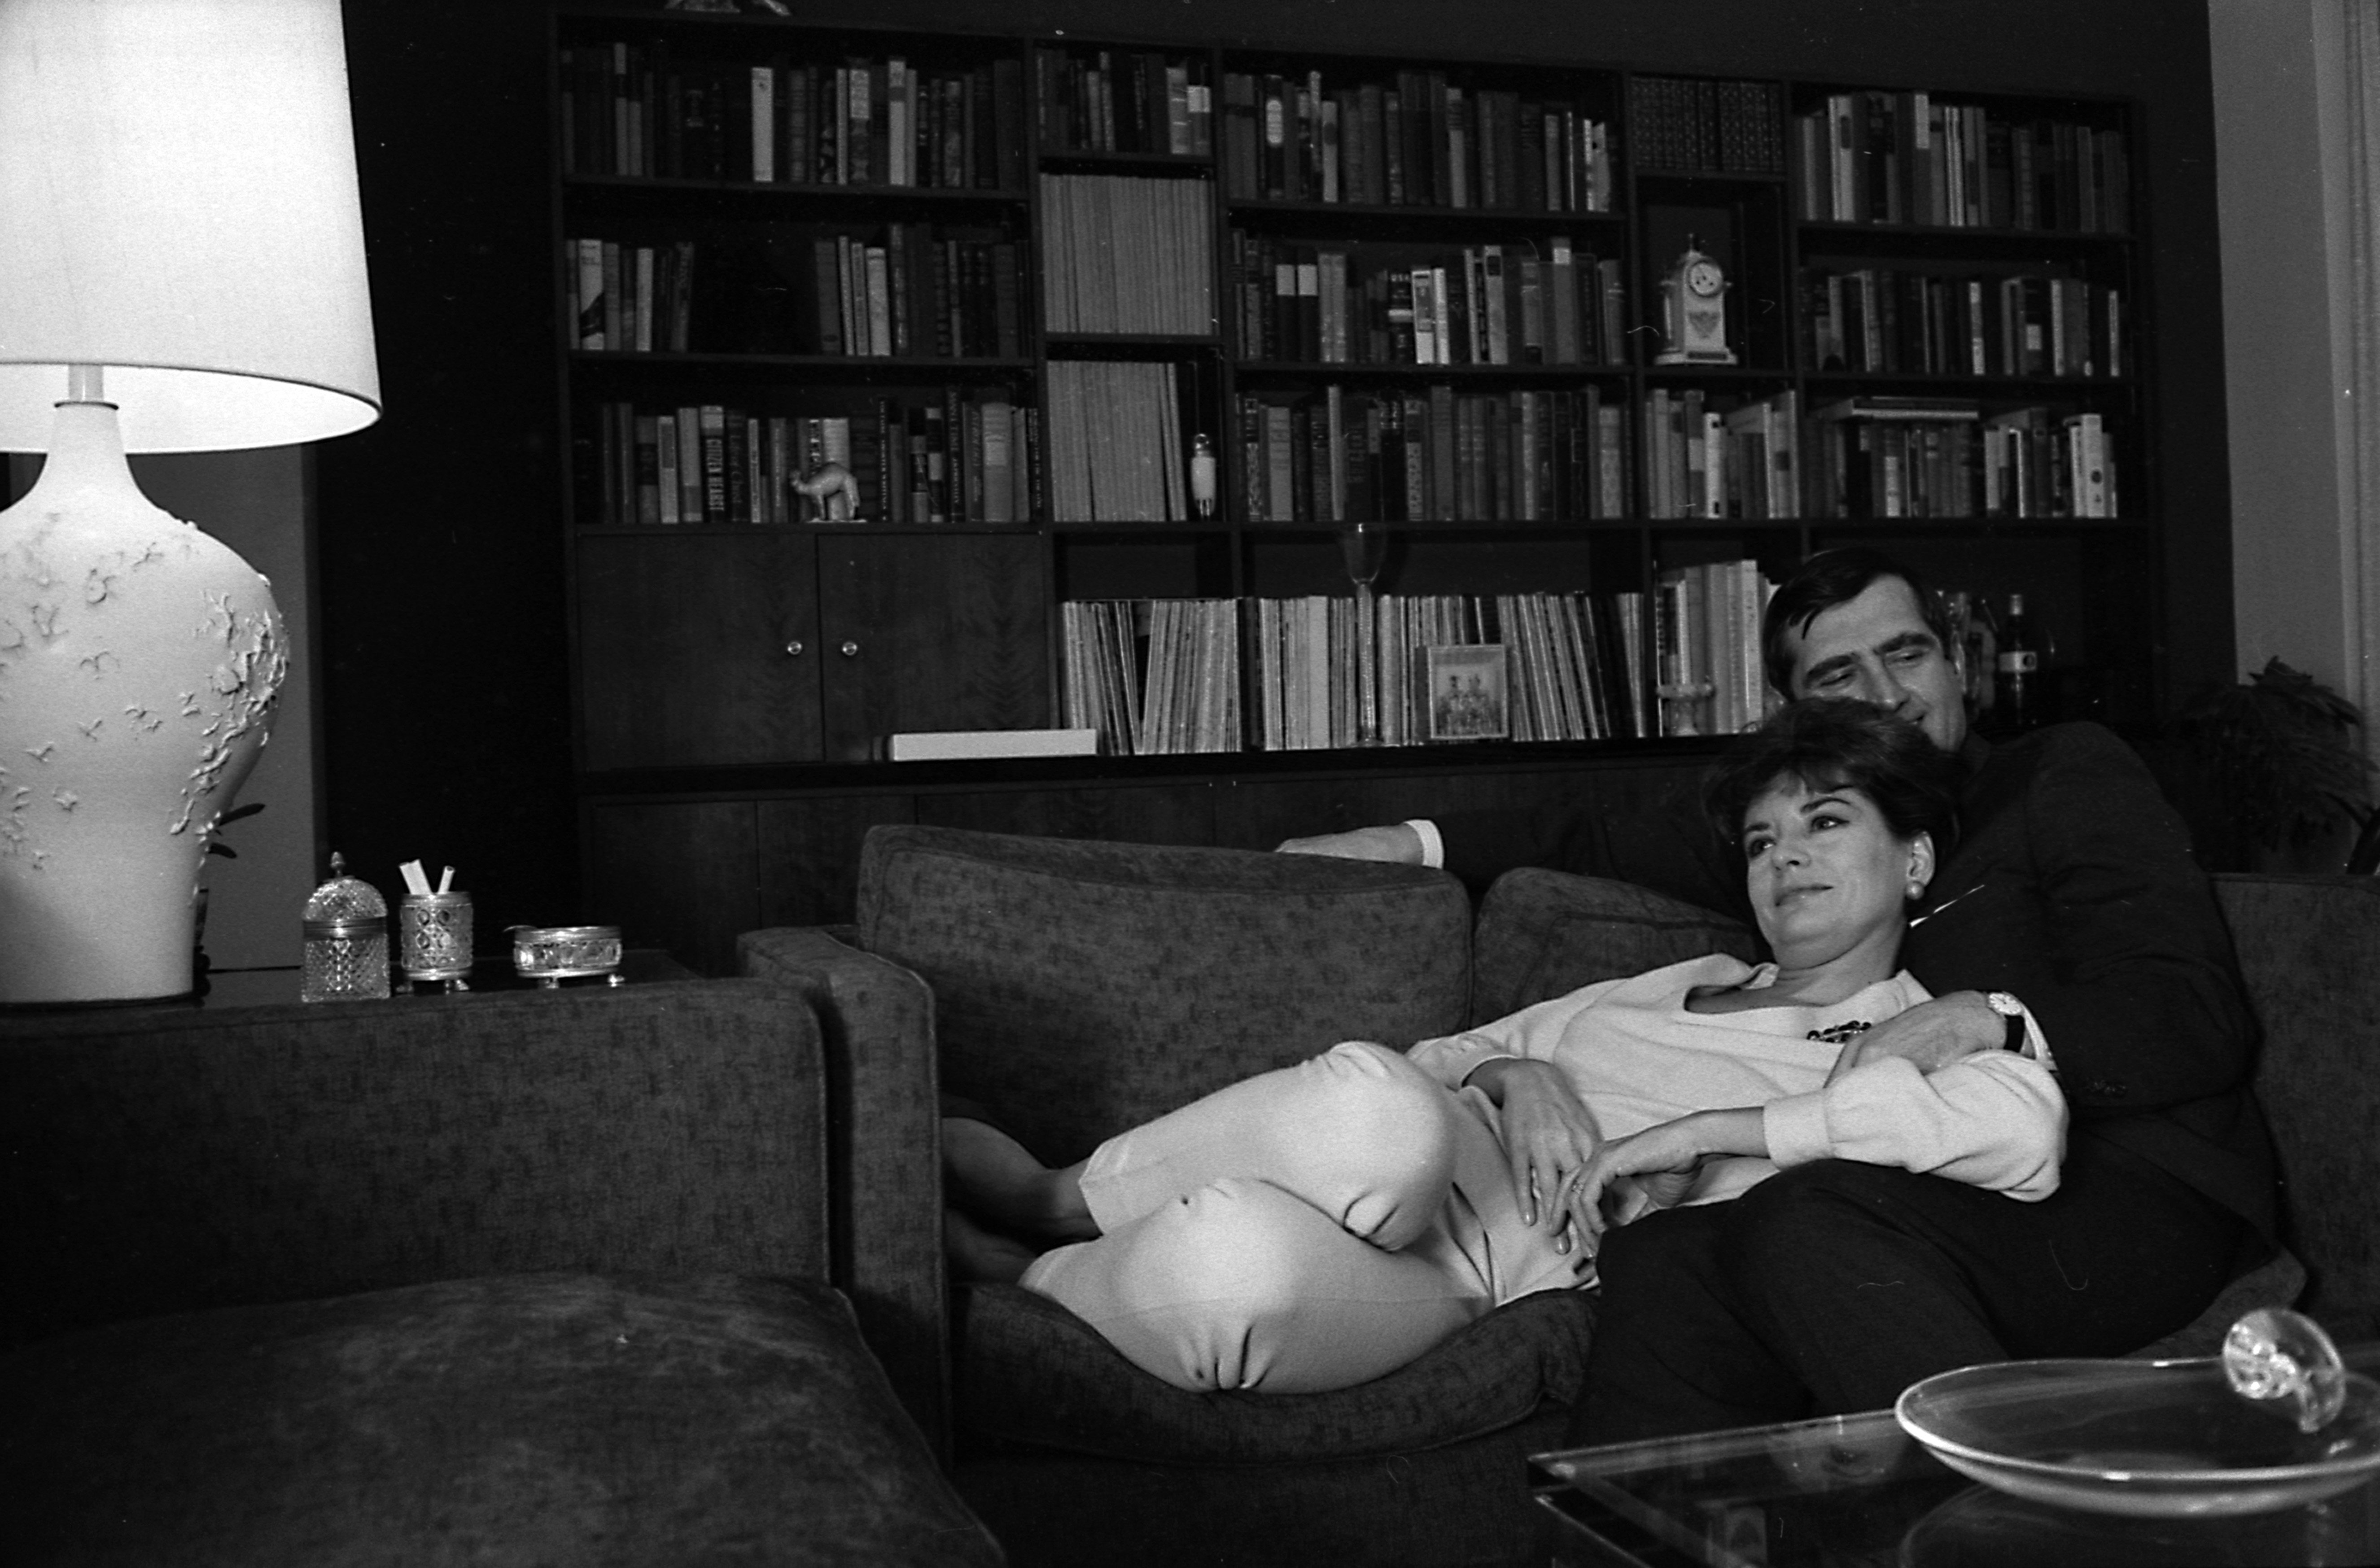  Barbara Walters and businessman and theatre producer Lee Guber, relax at their home in New York, circa 1966 | Photo: Getty Images